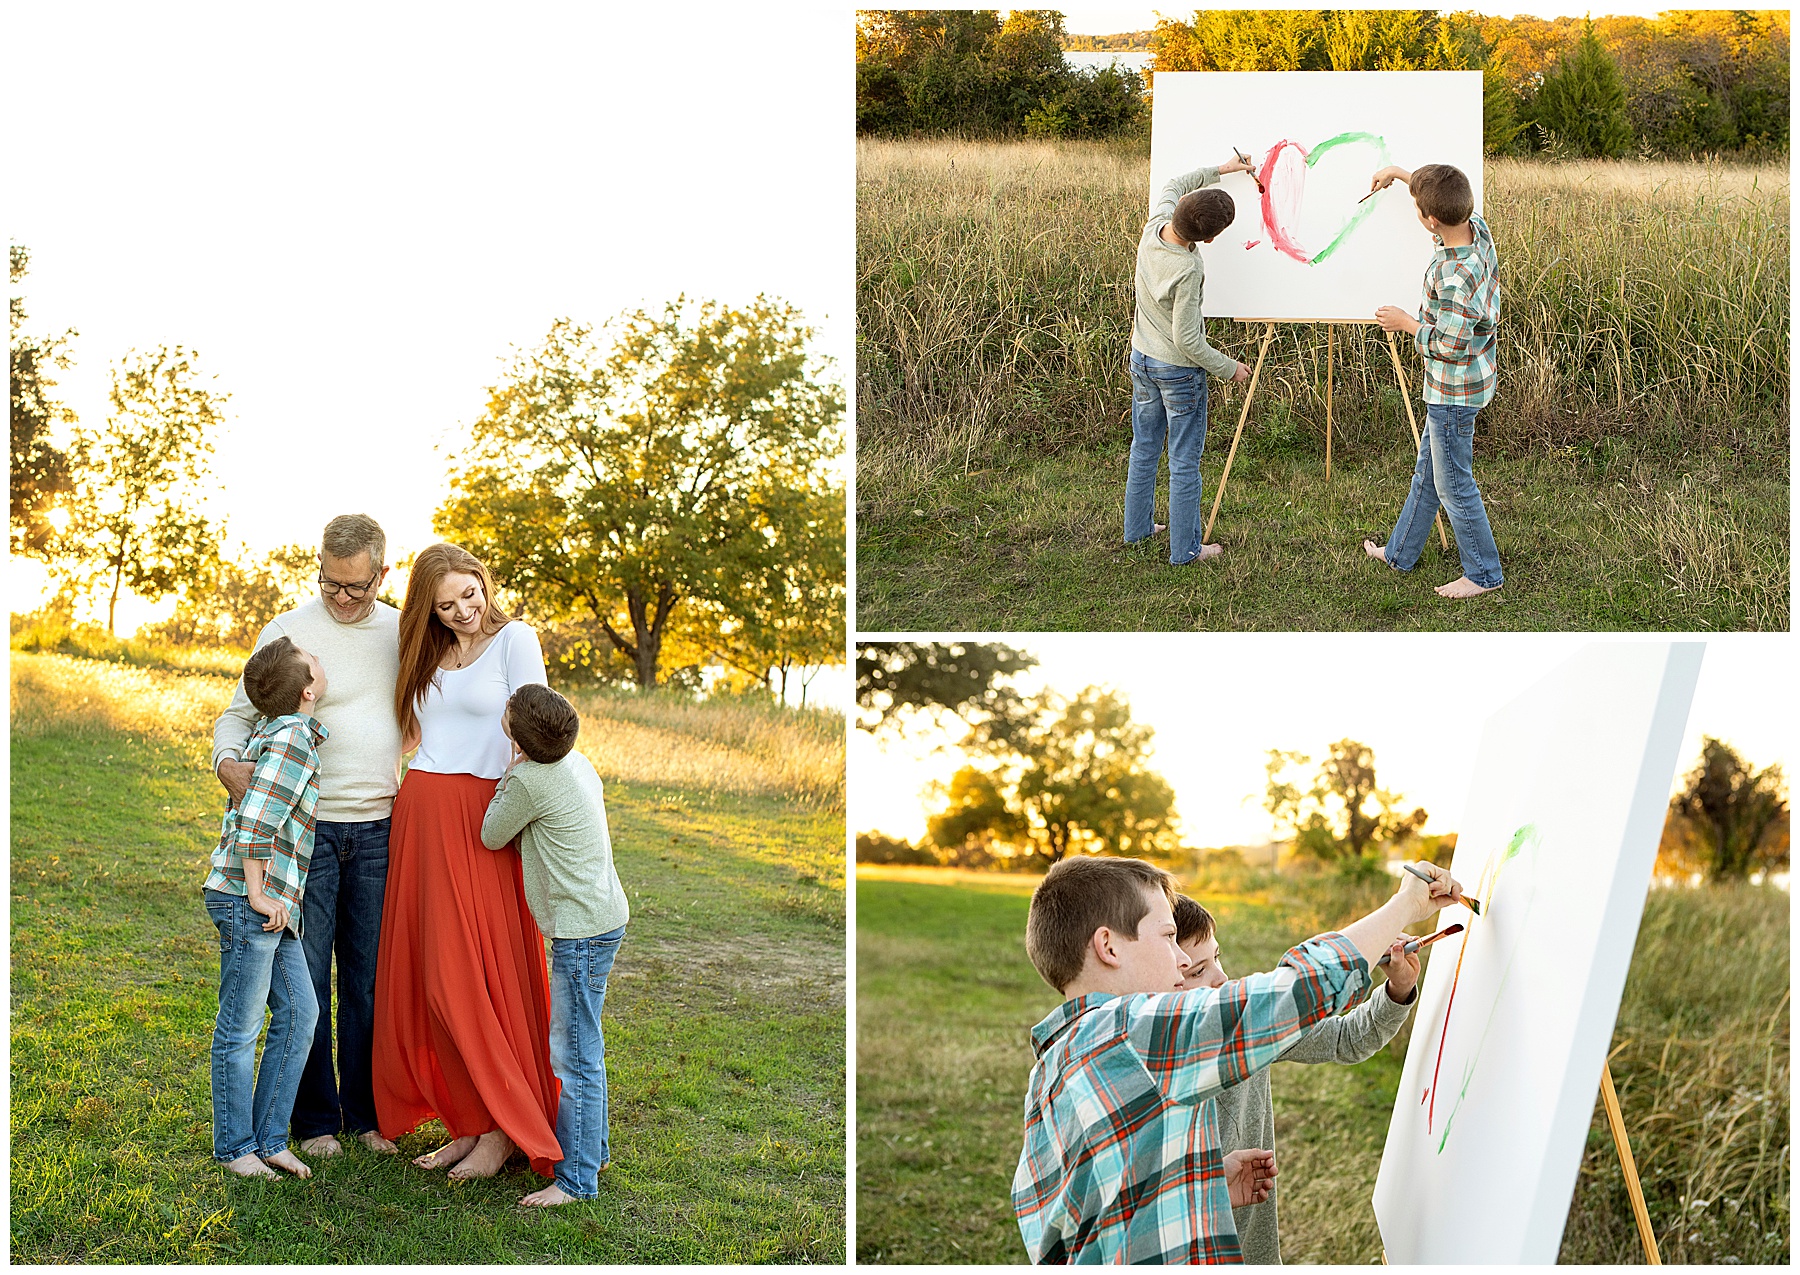 Dallas family session painting canvas together